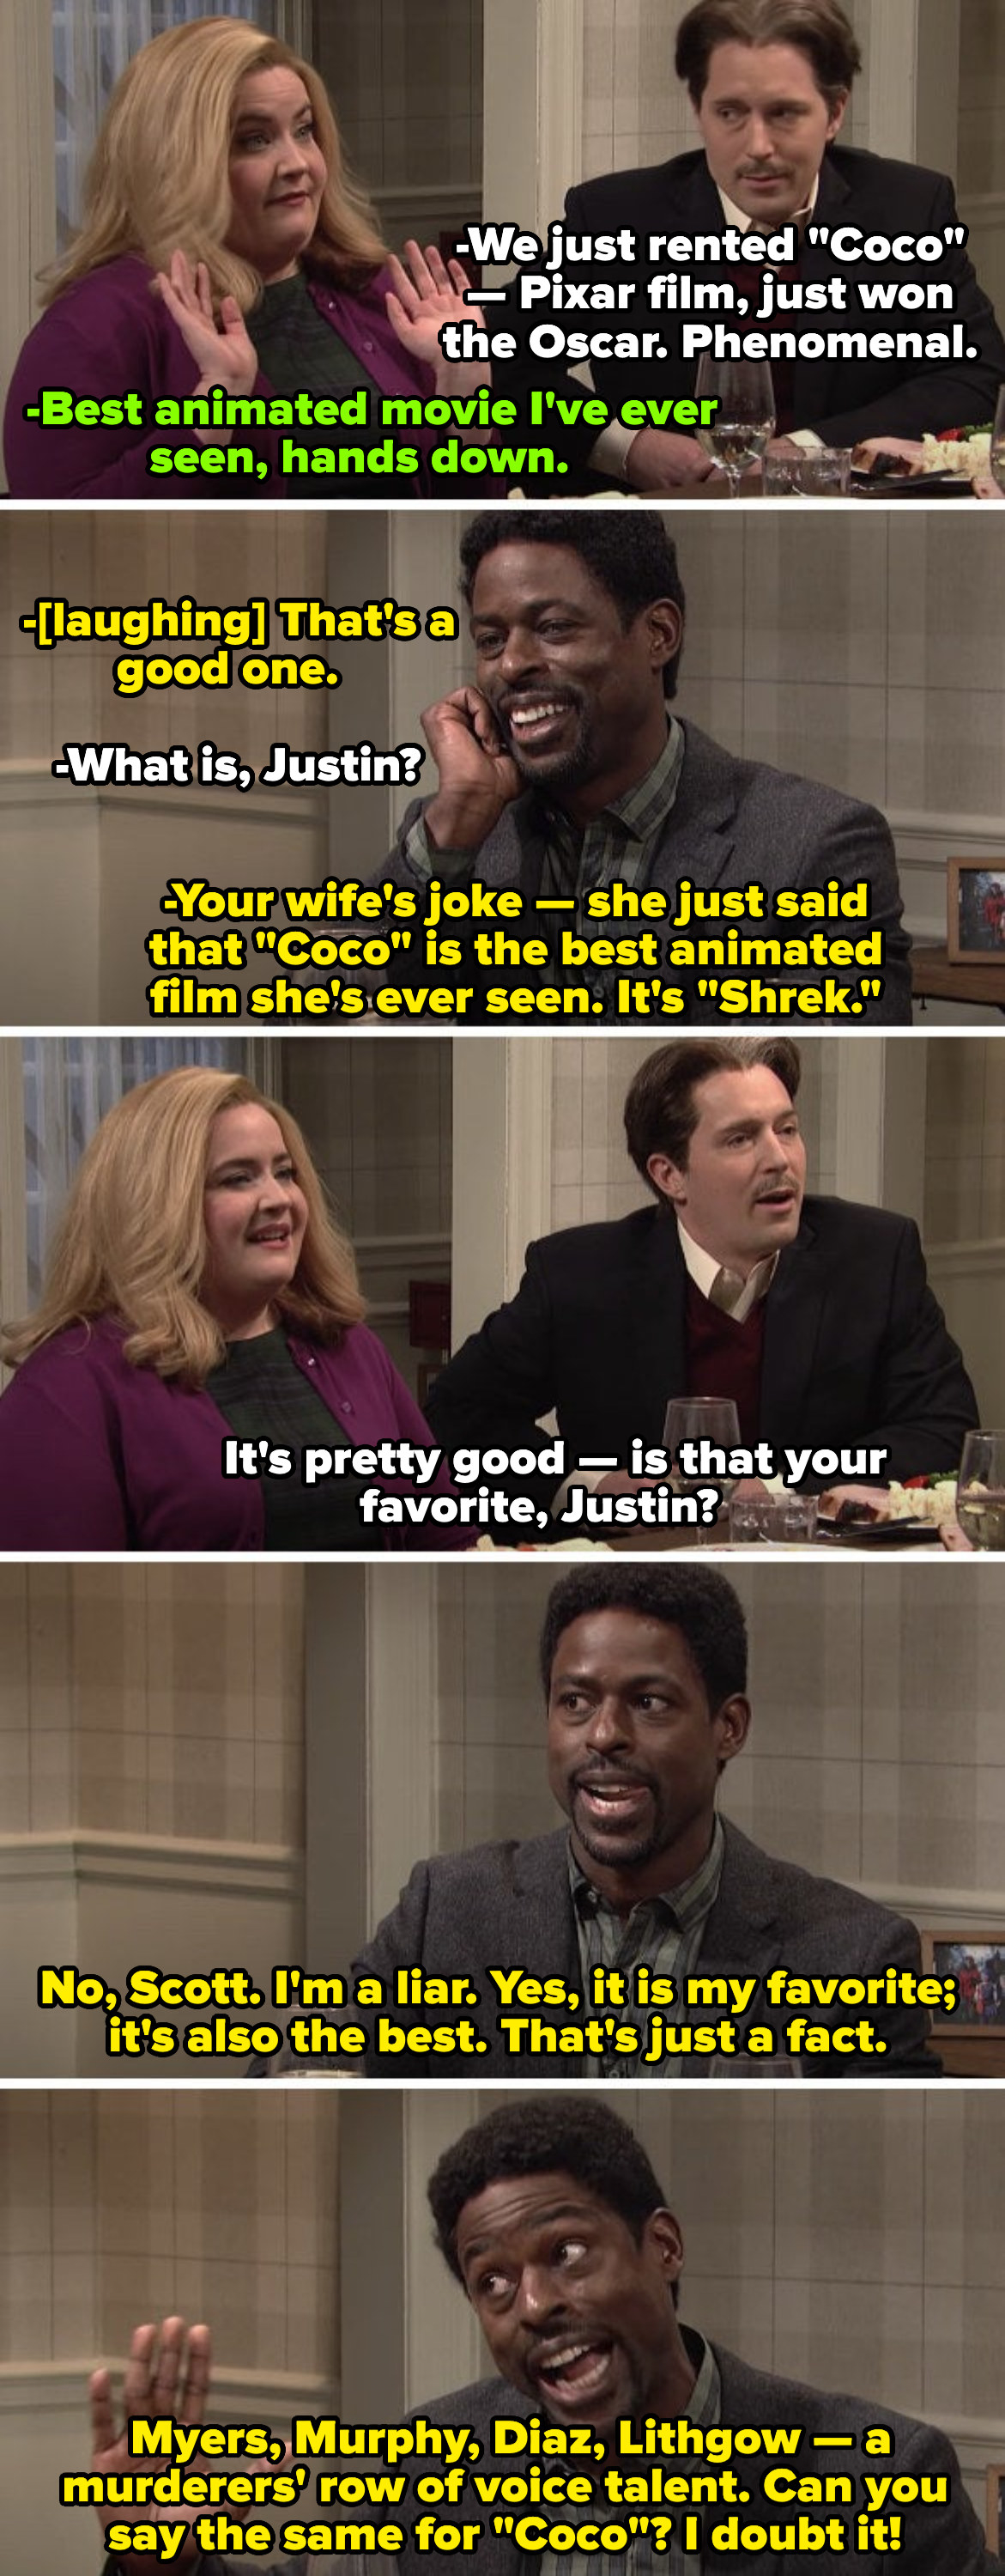 Sterling K. Brown in the &quot;Shrek Family Dinner&quot; sketch, expressing his deep admiration for the animated film